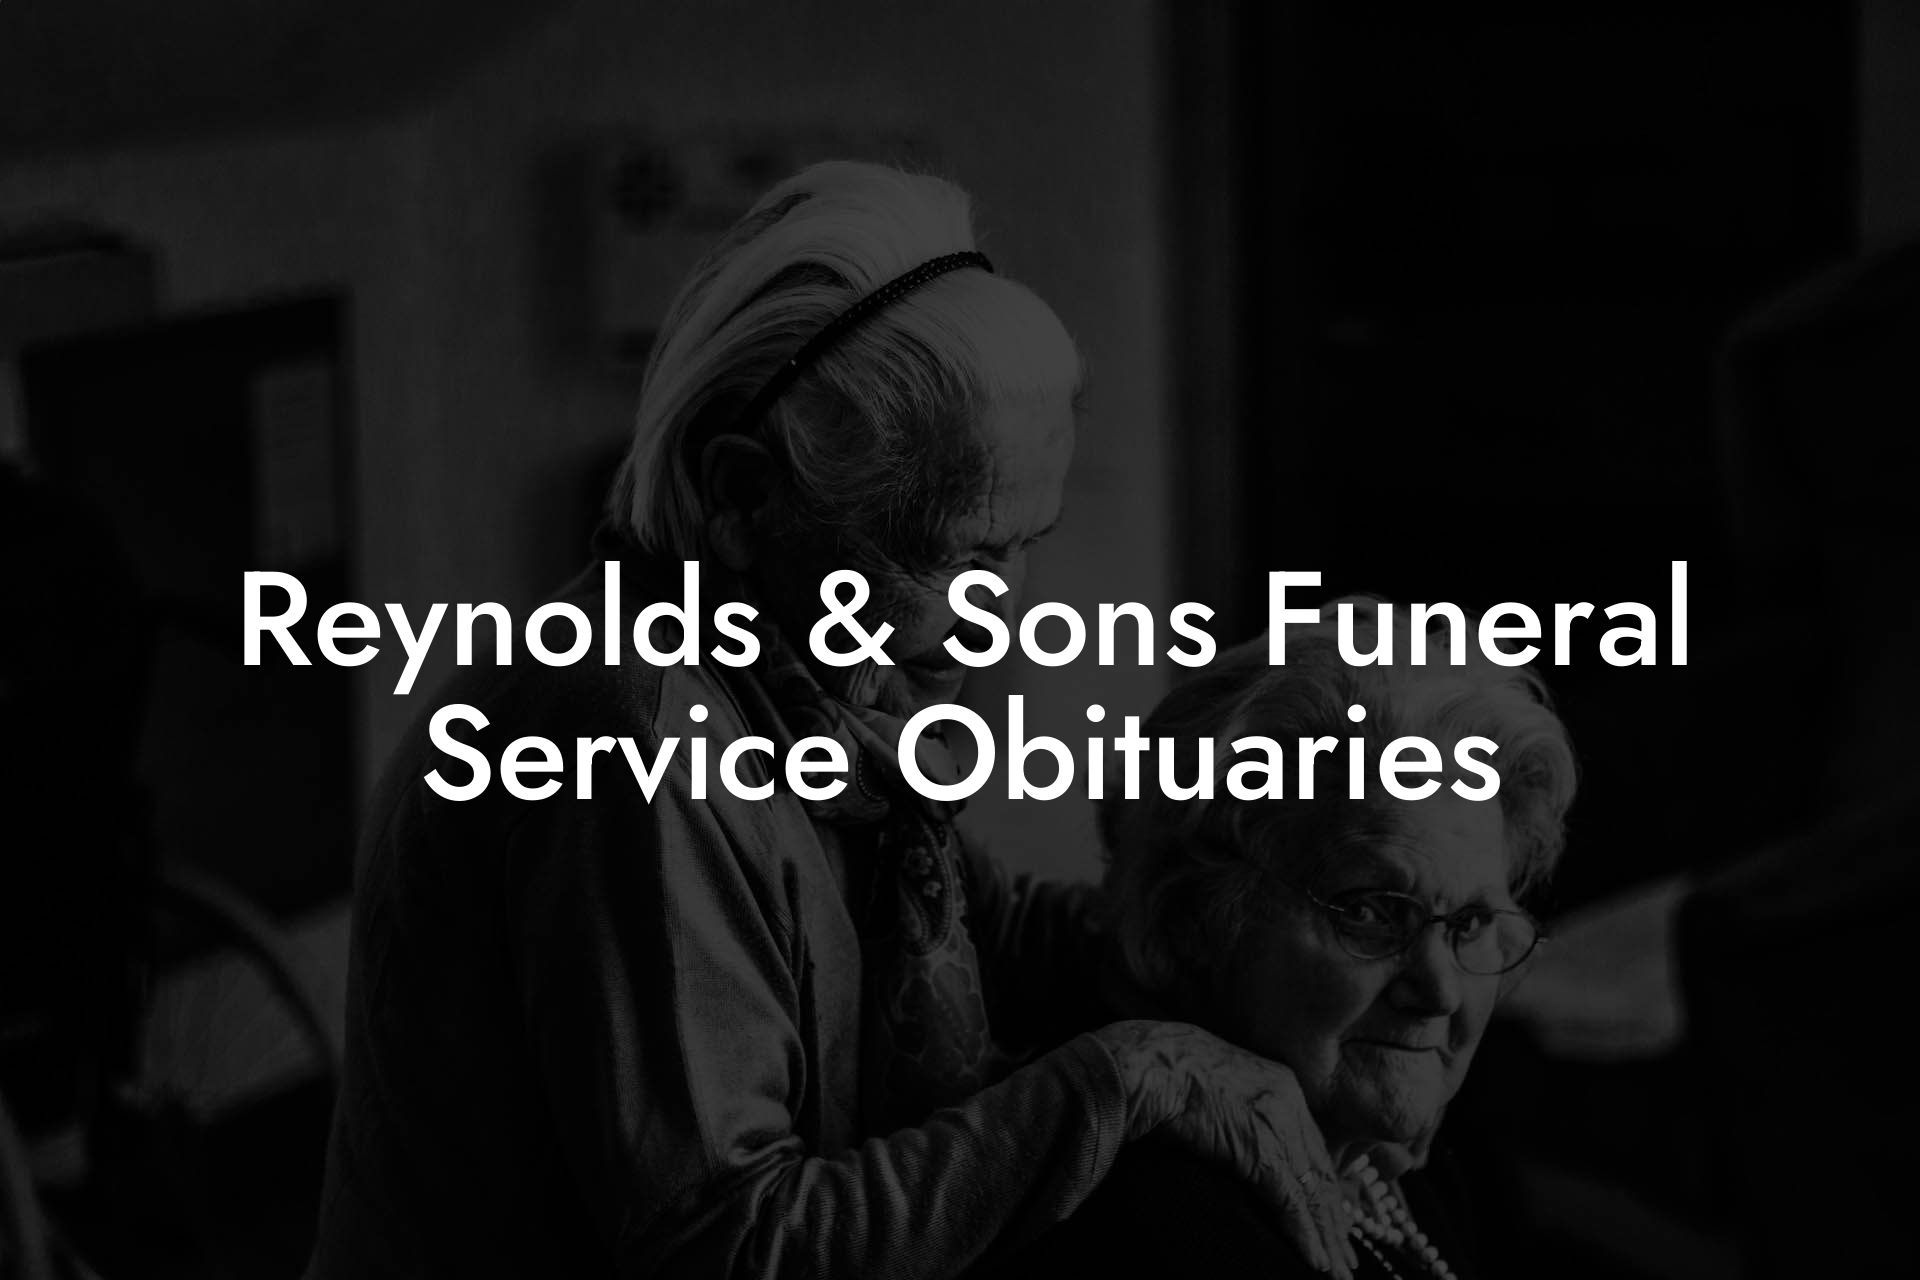 Reynolds & Sons Funeral Service Obituaries